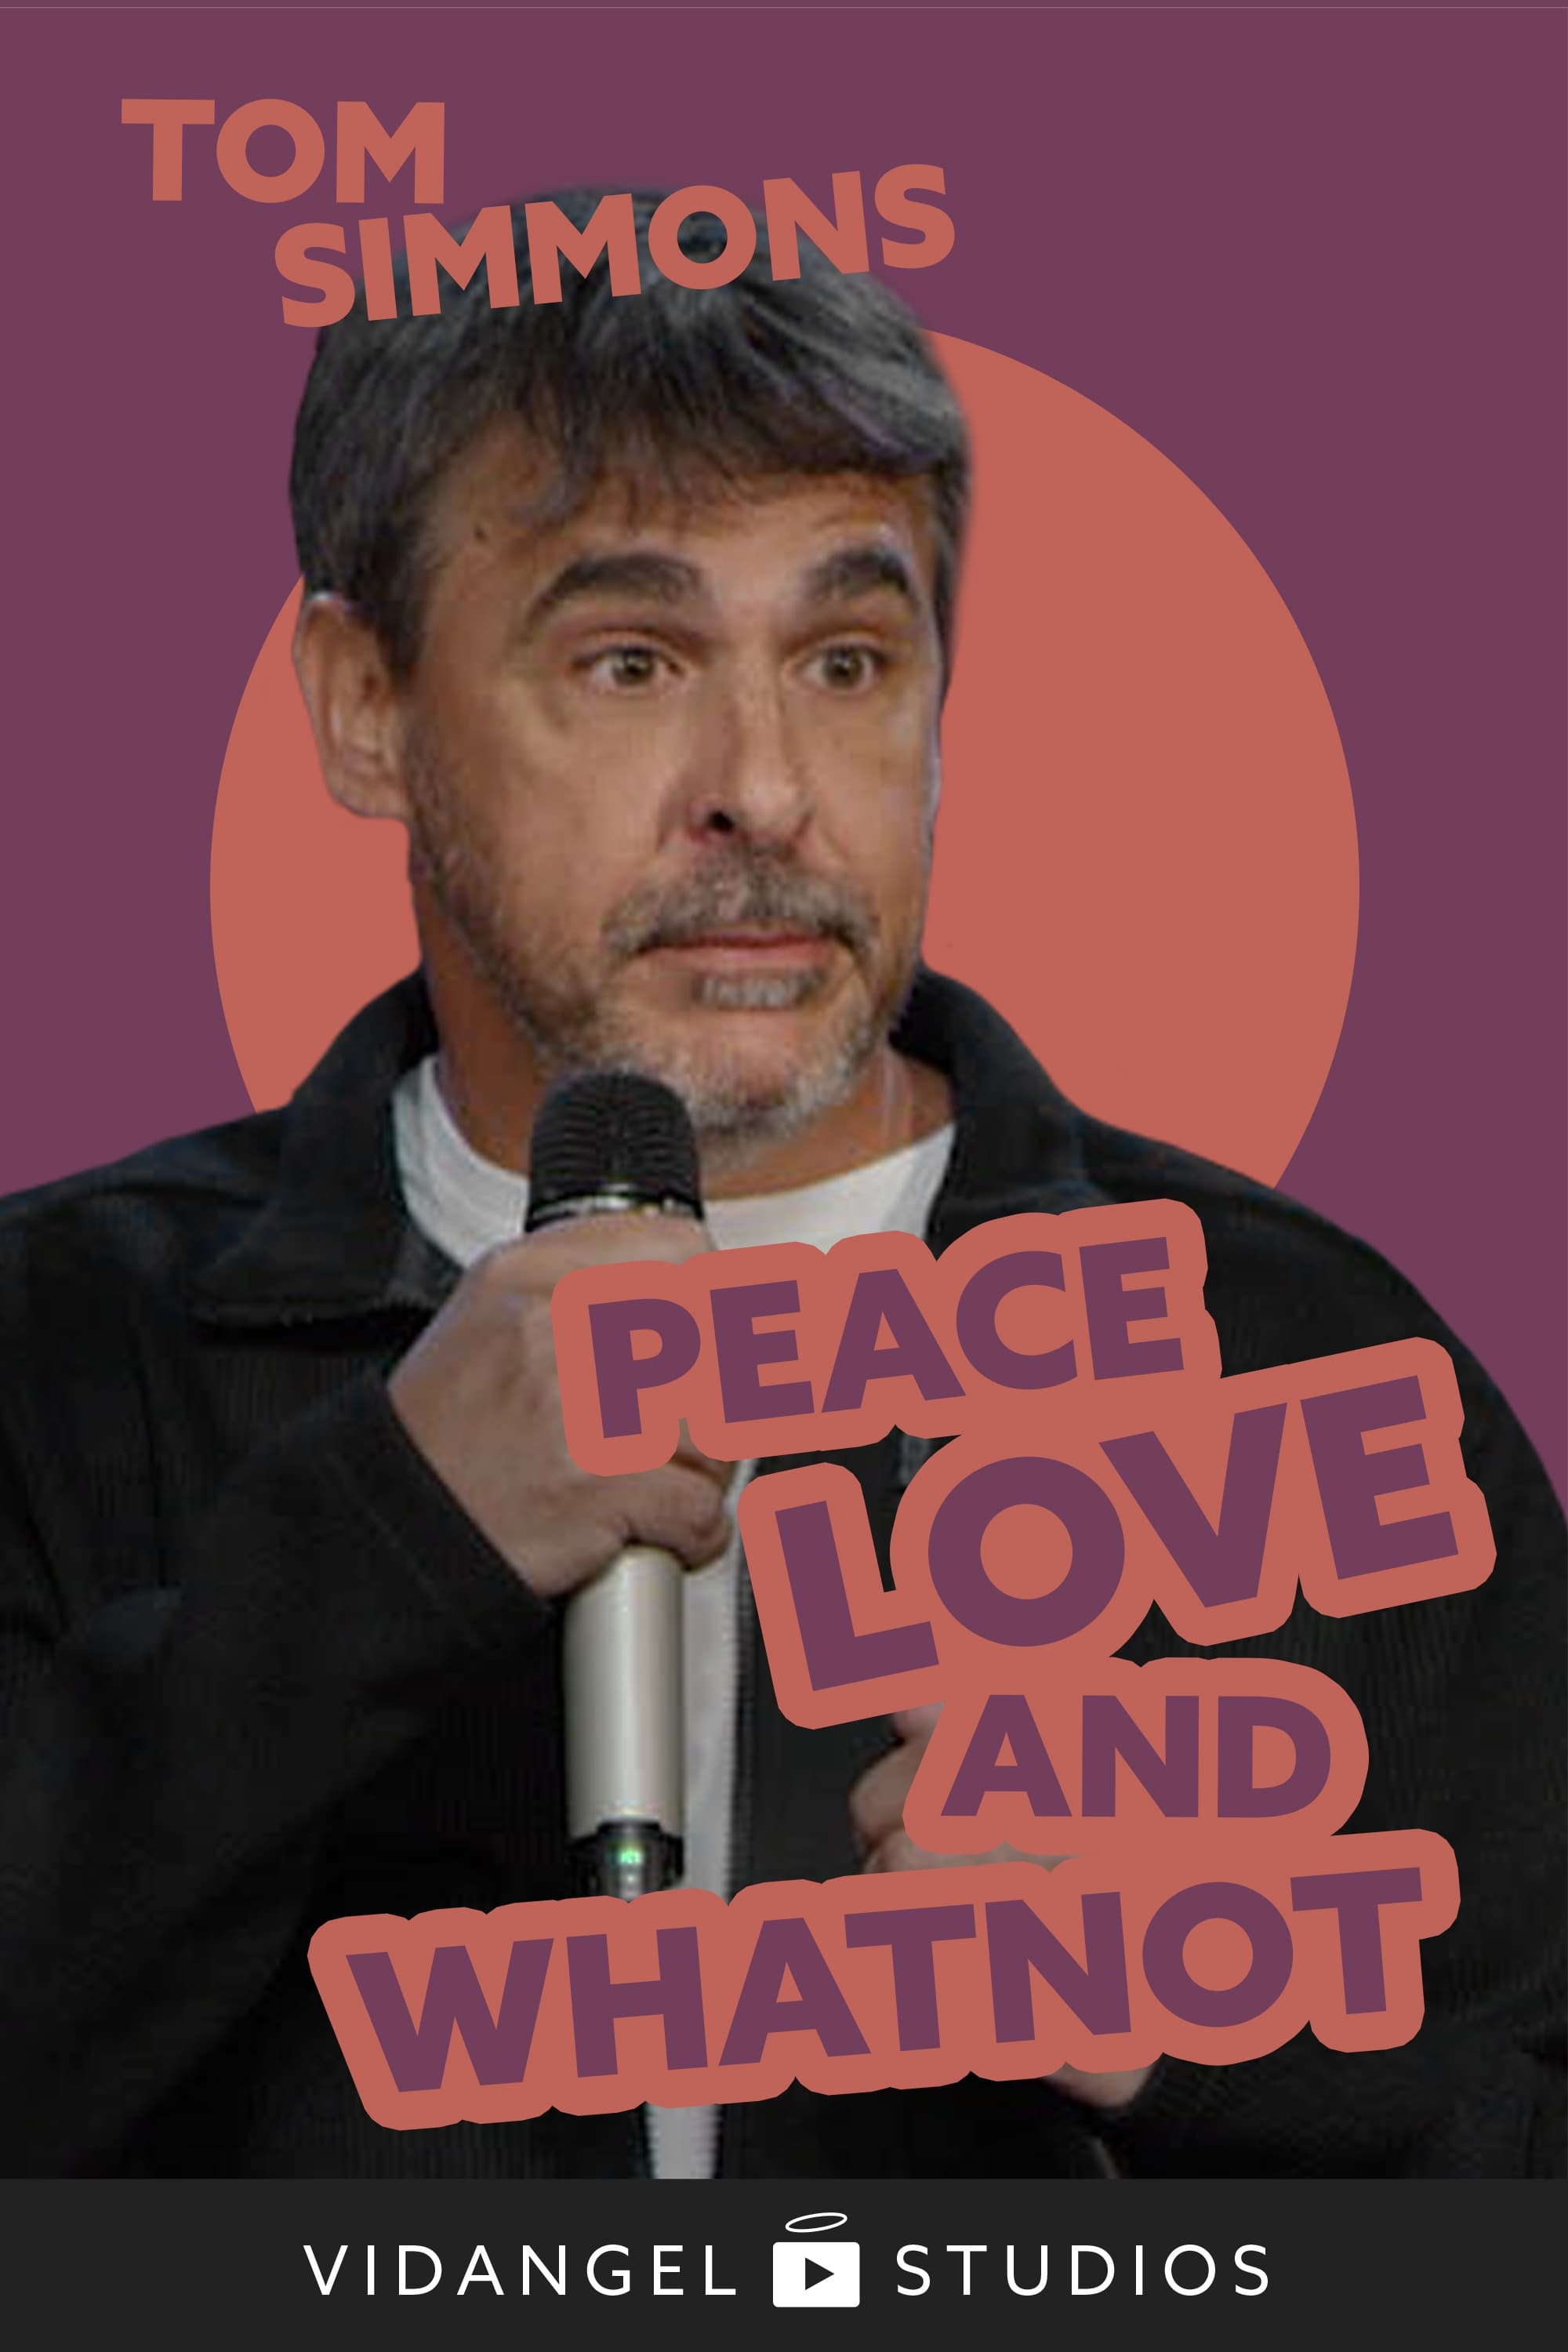 Tom Simmons: Peace Love and Whatnot